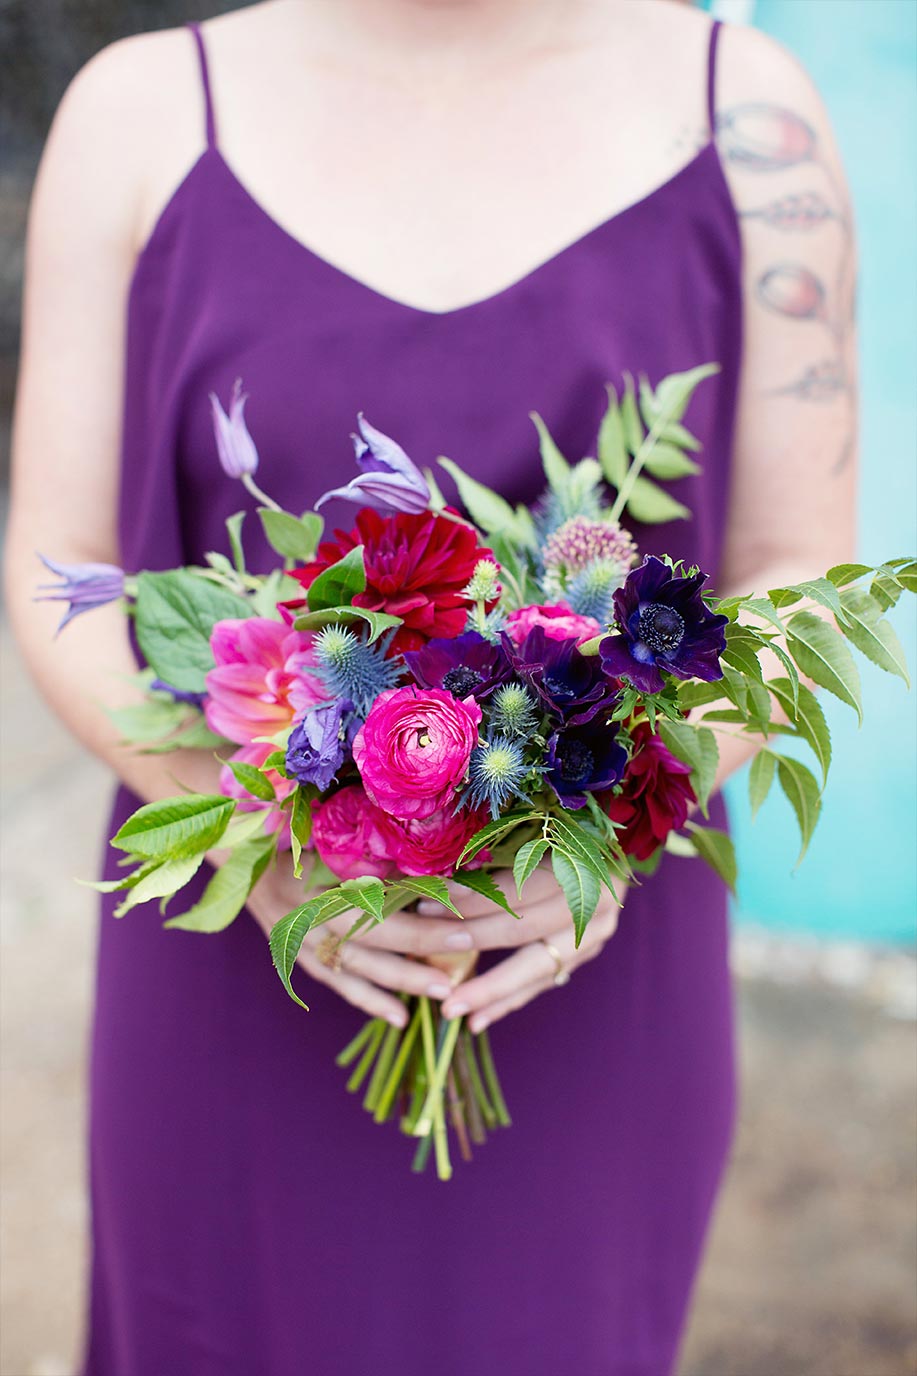 Pink and purple bridesmaid bouquet and purple dress